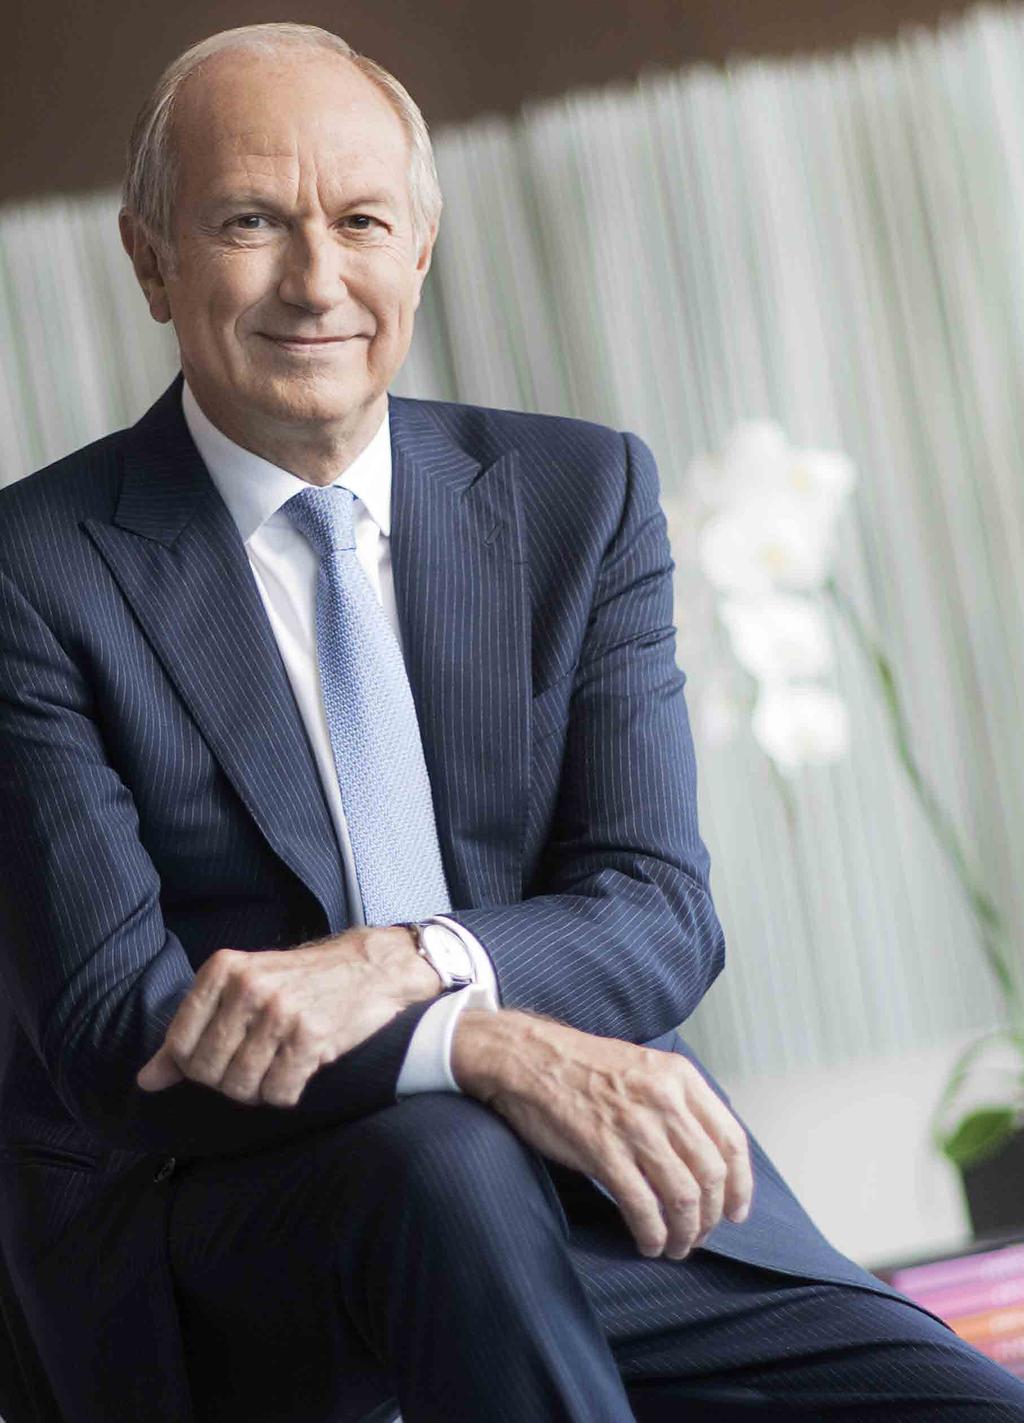 P R O S P E C T S by Jean-Paul Agon, Chairman and Chief Executive Officer 2016 was another good year for L Oréal.